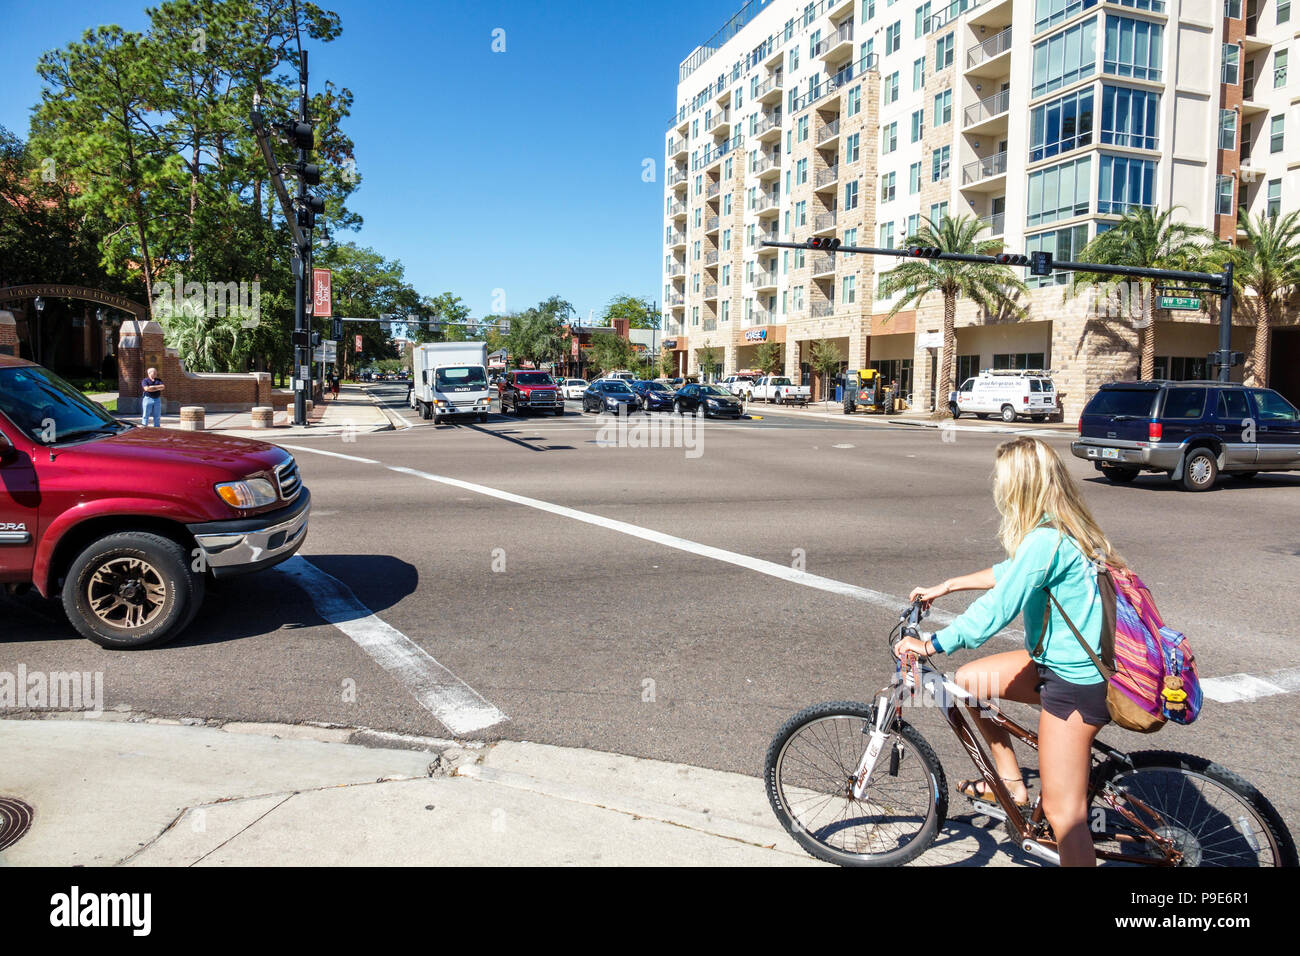 Gainesville Florida,University Avenue,traffic intersection,street crossing,student students education pupil pupils,cycling bicycle bicycles bicycling Stock Photo